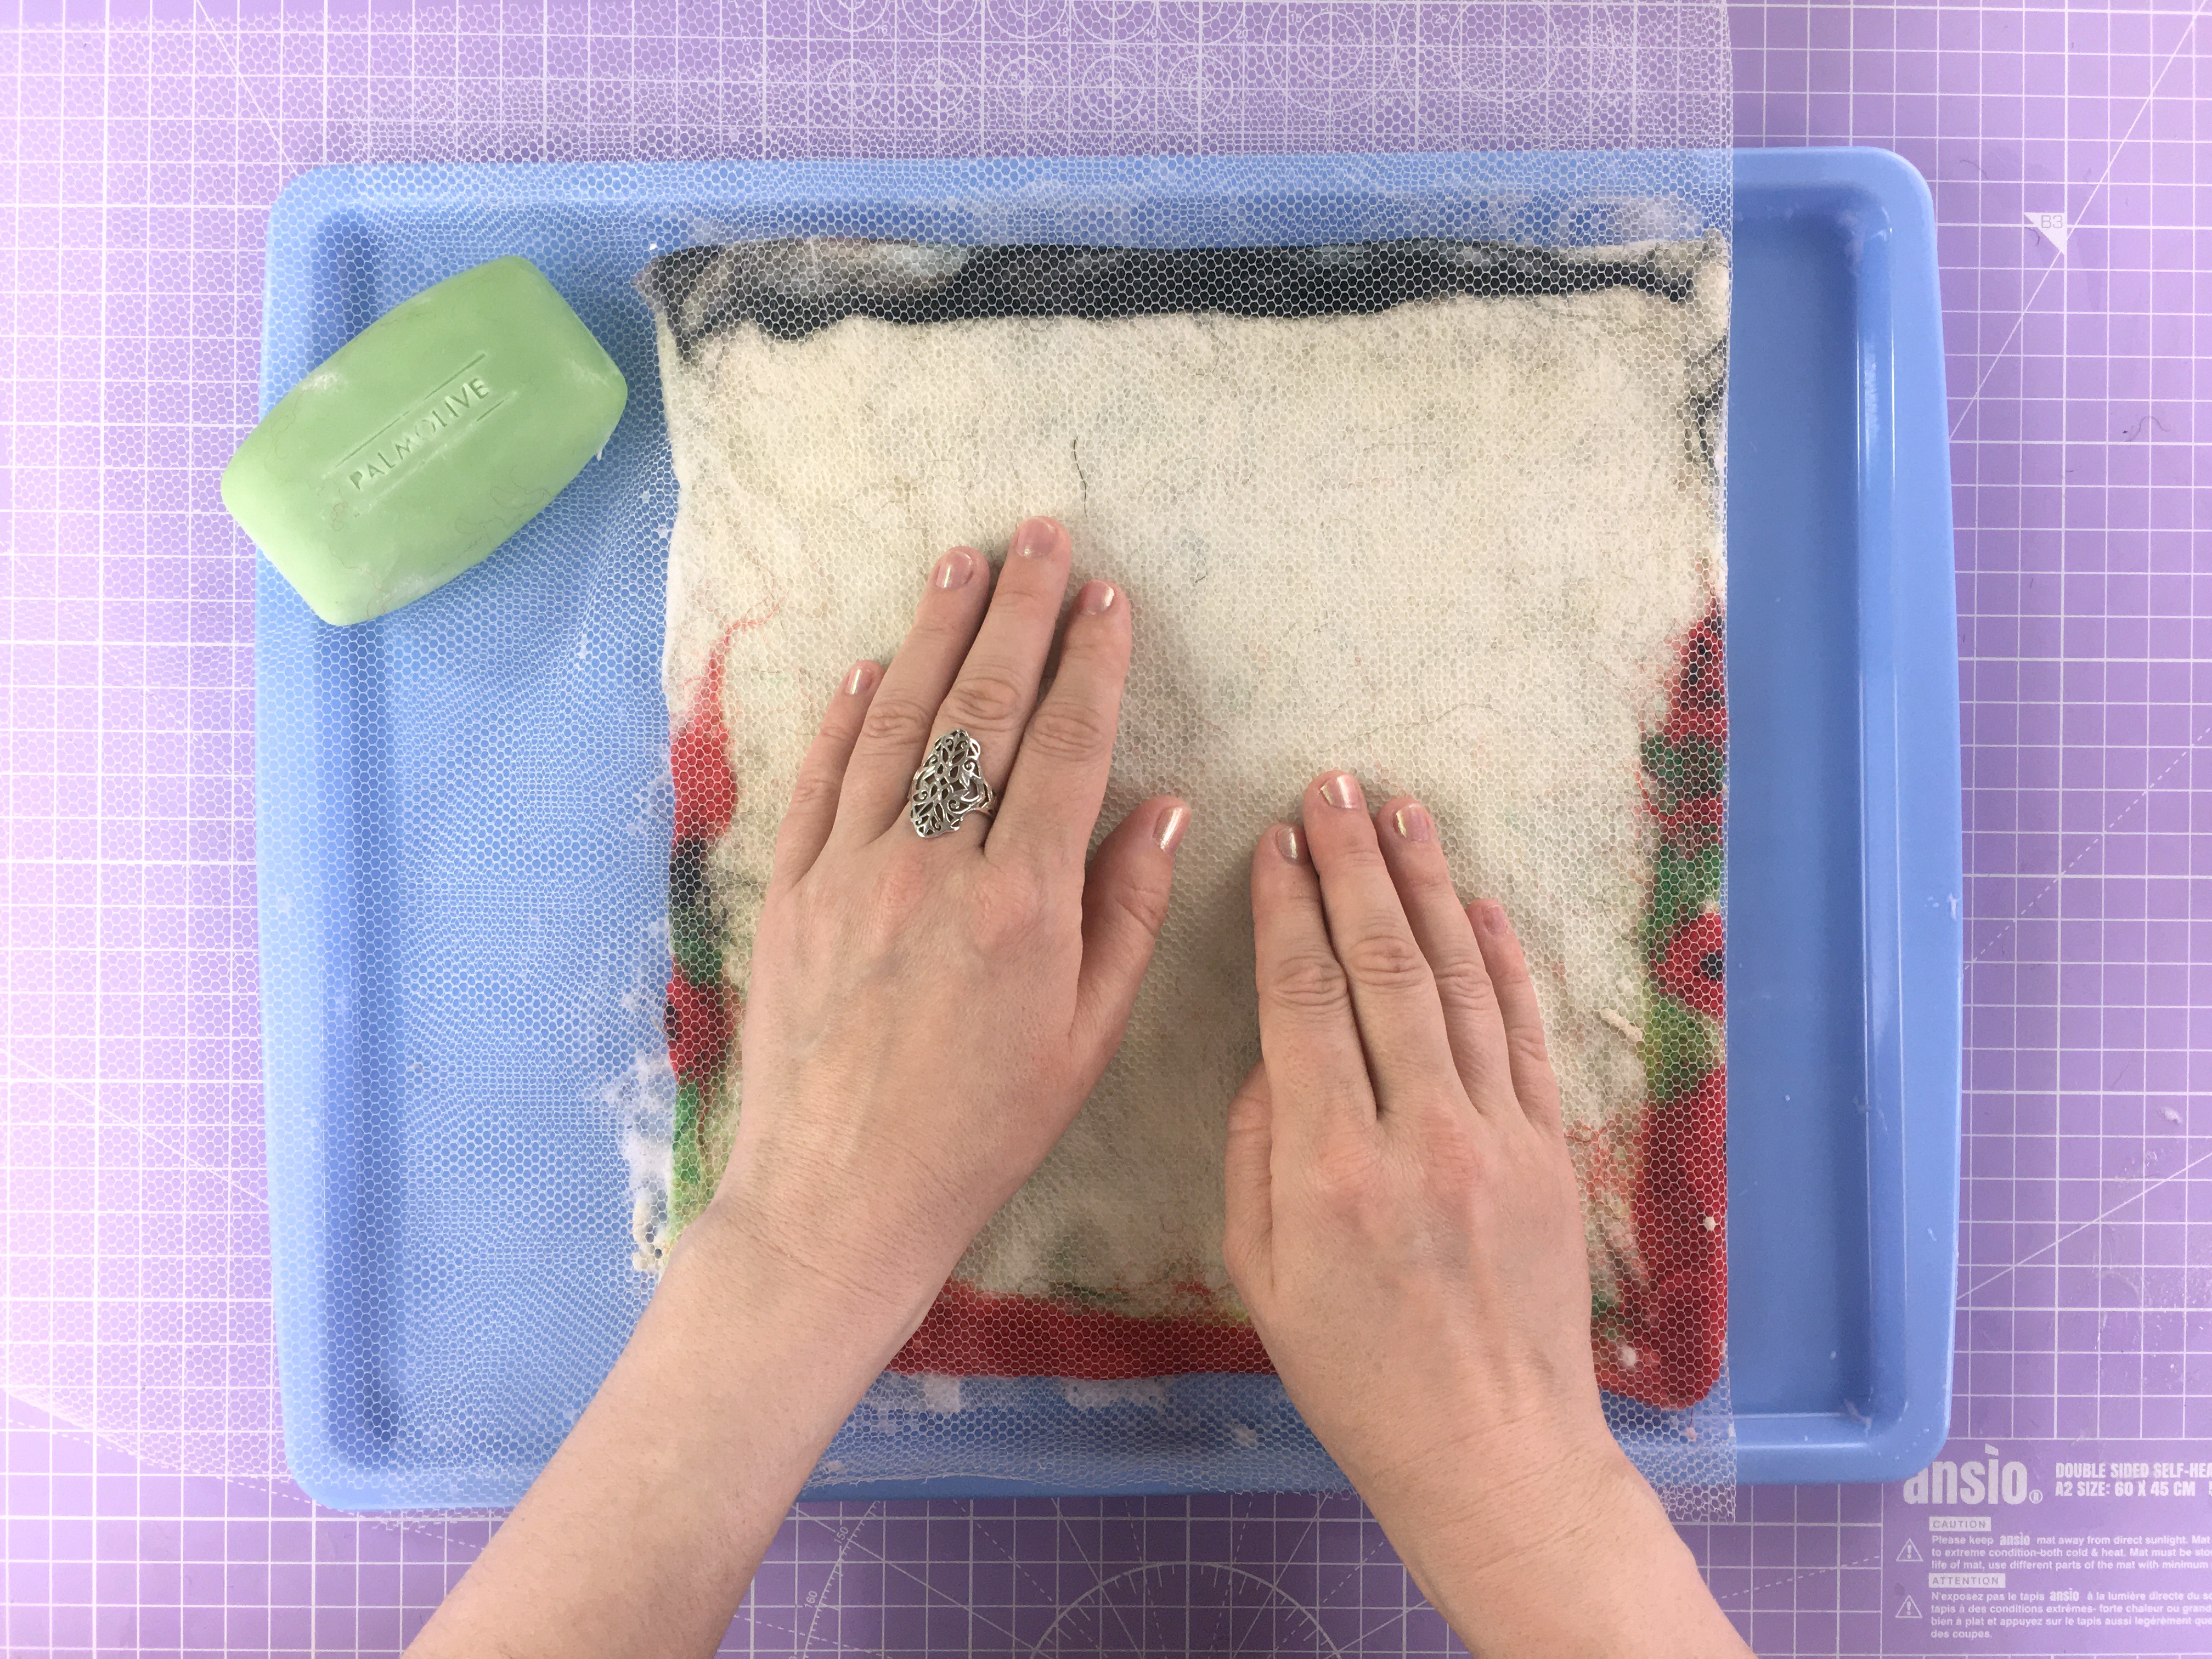 Wool Pressing Mat Product Review - Simple Handmade. Everyday